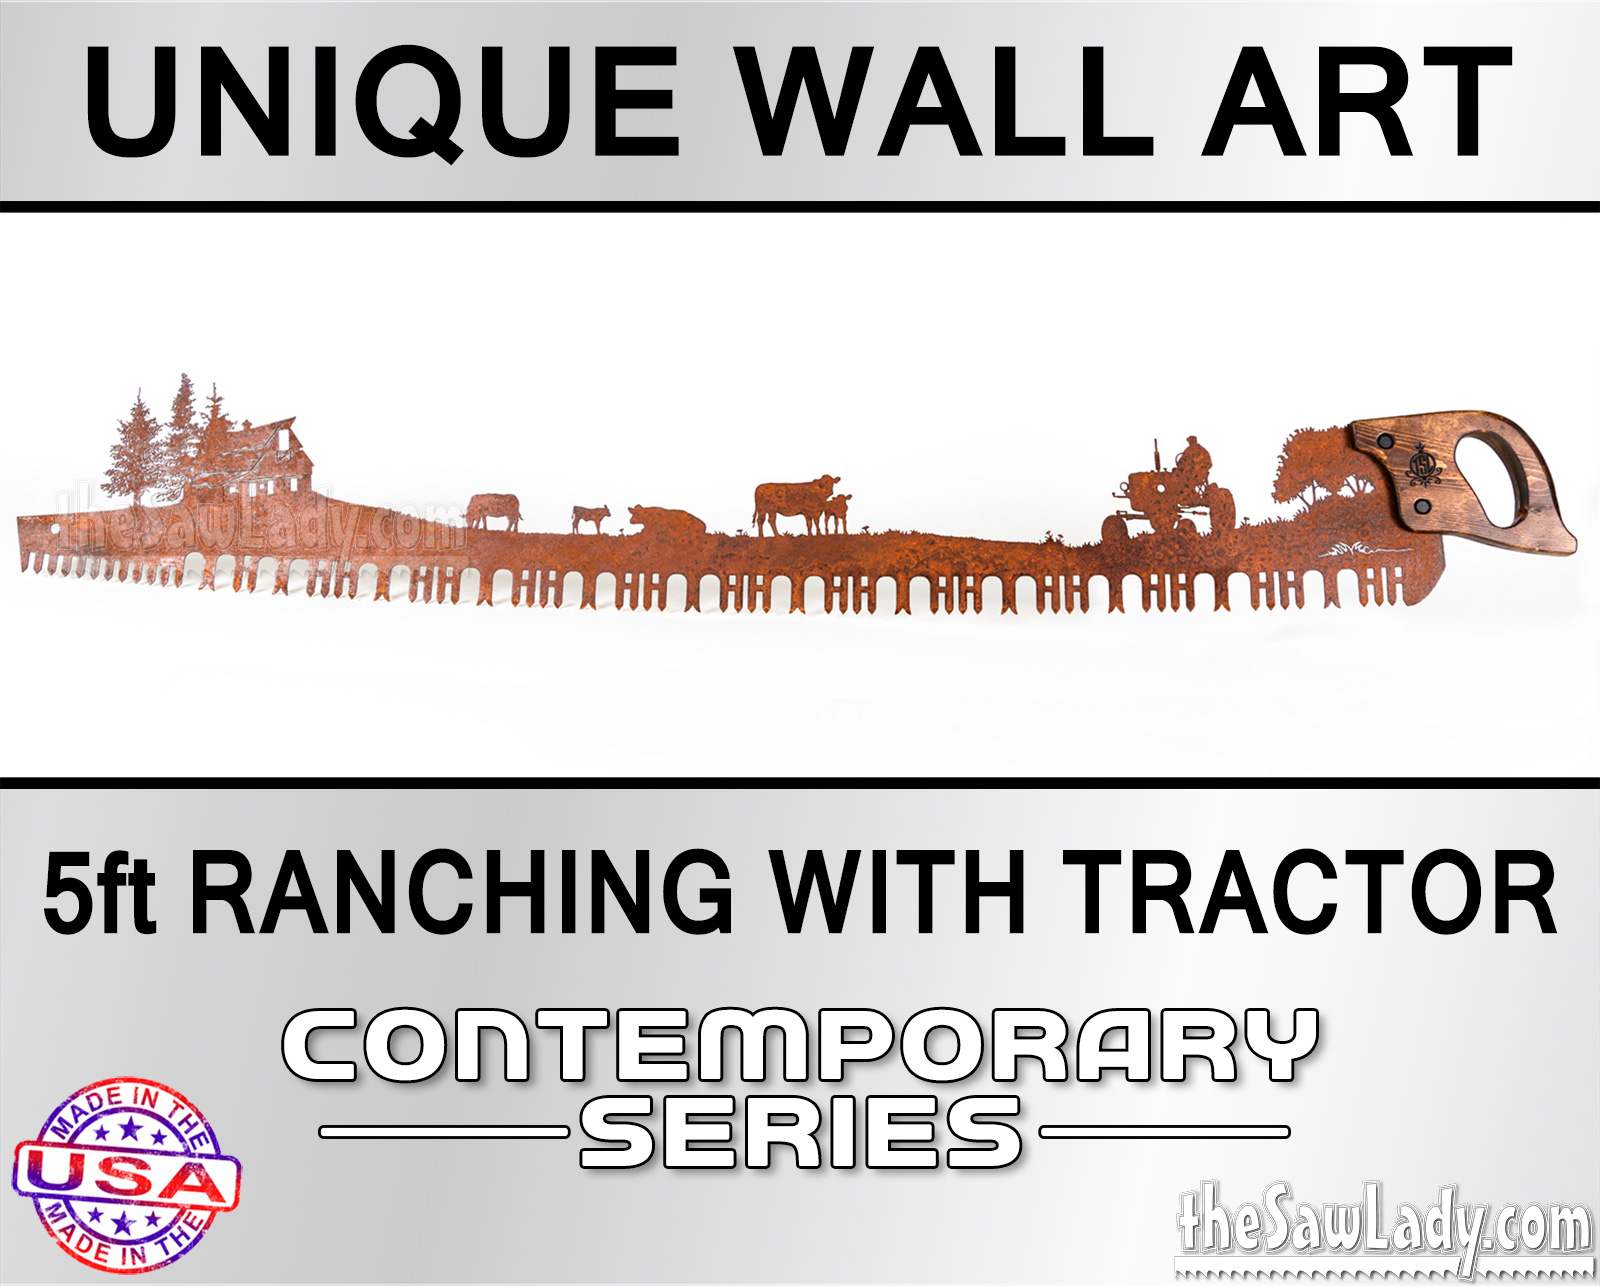 5ft-ranching-tractor-contemp-metal-saw-art